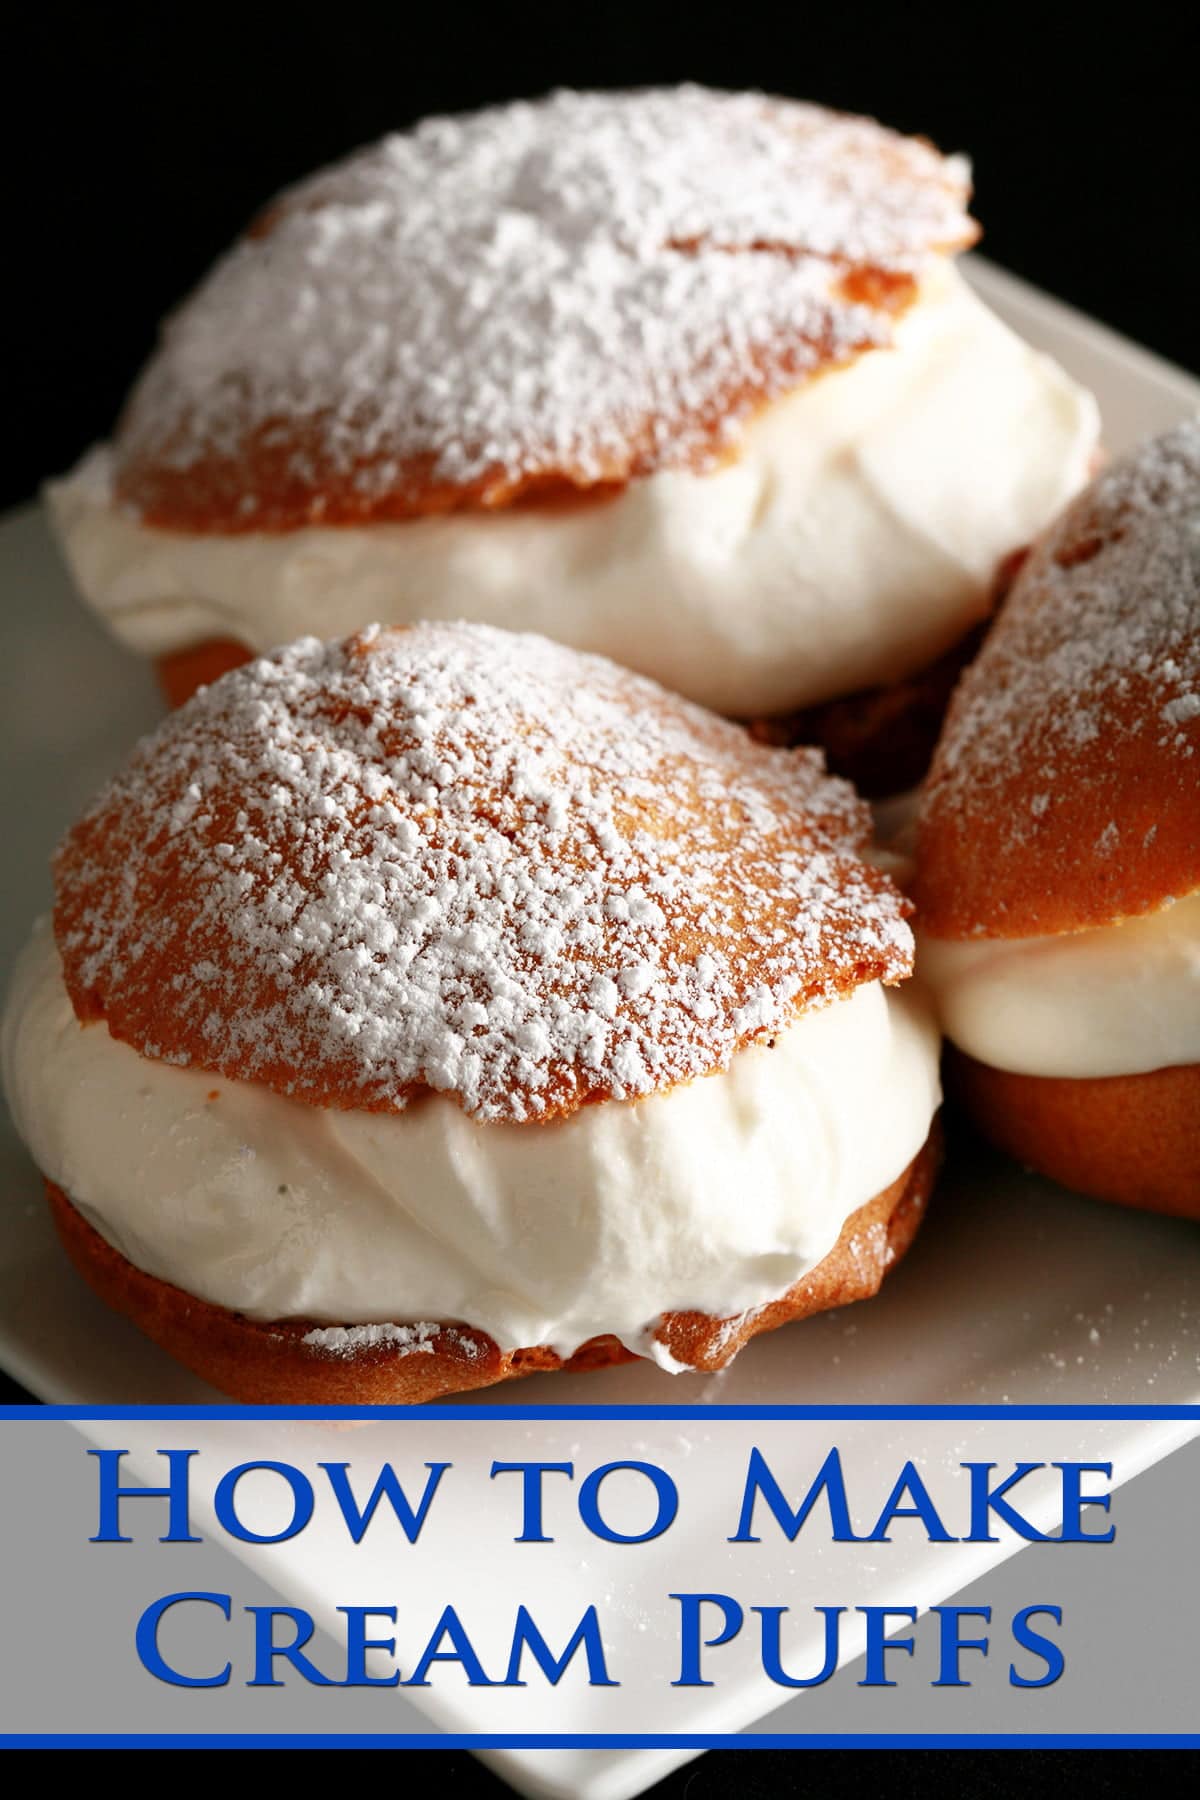 3 Large Cream puffs - with whipped cream in the center, topped with powdered sugar - are pictured on a white plate.